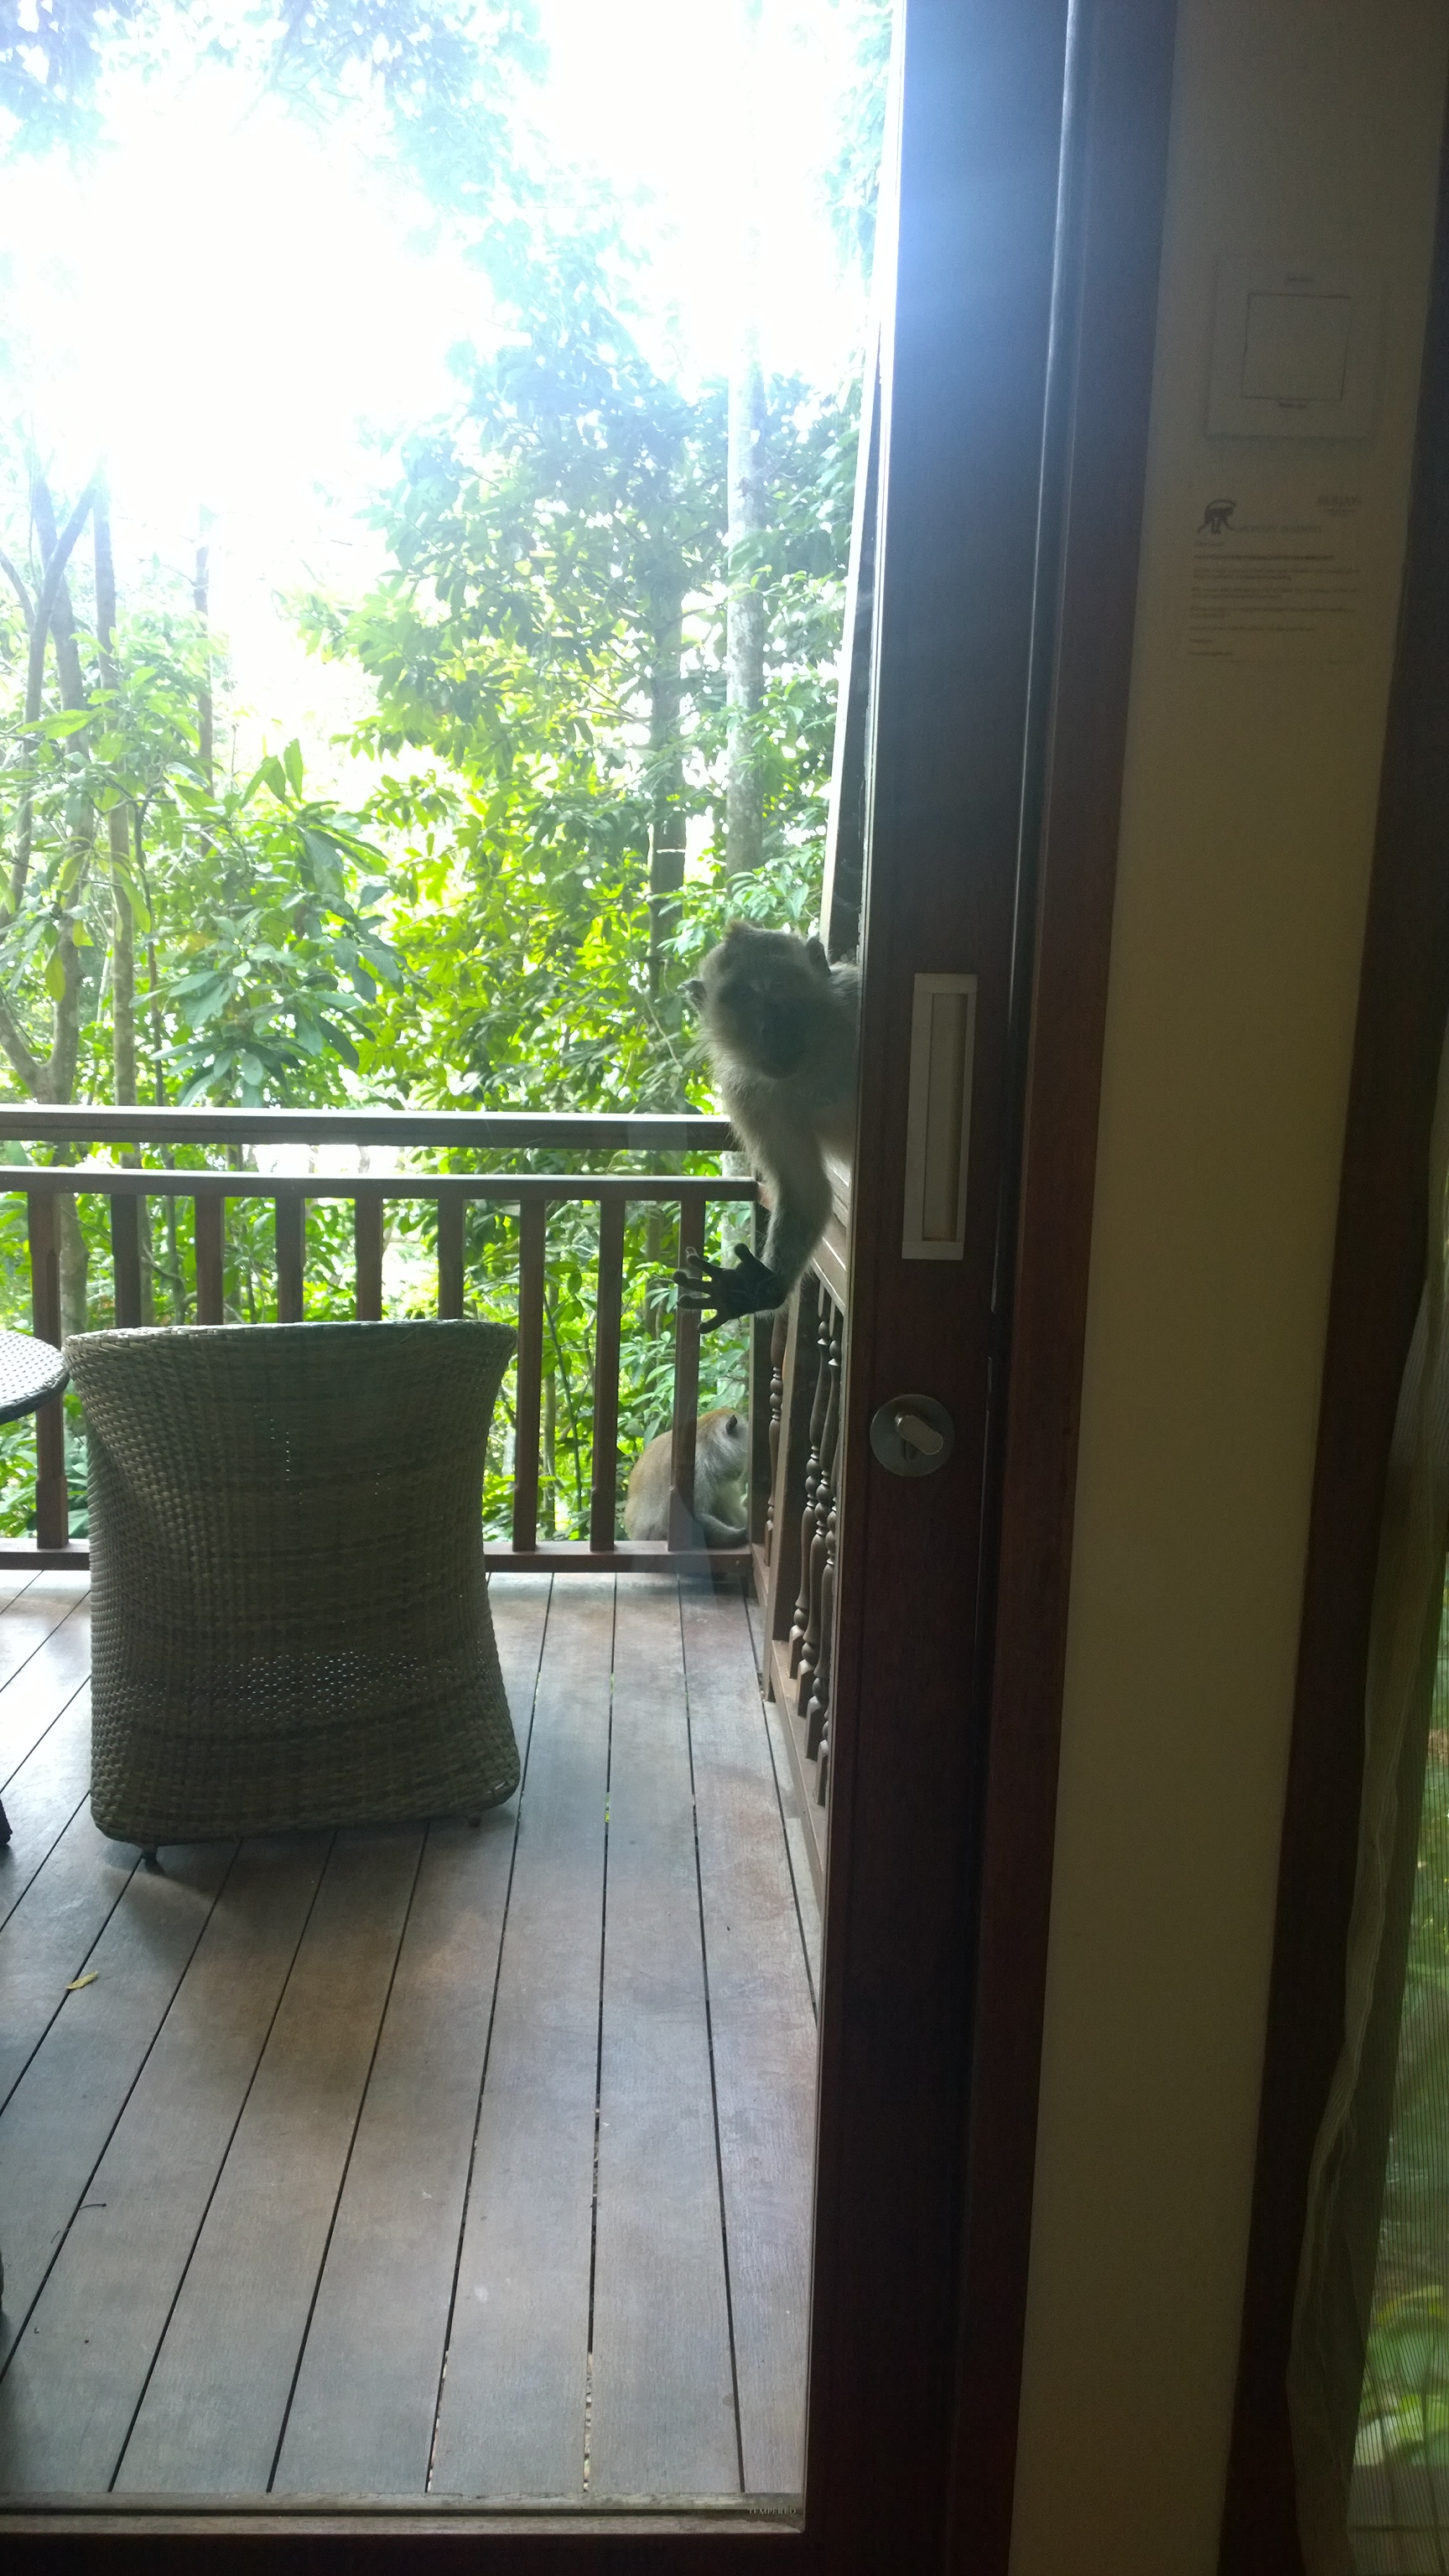 Another macaque stopping by my balcony, peering into my hotel room window